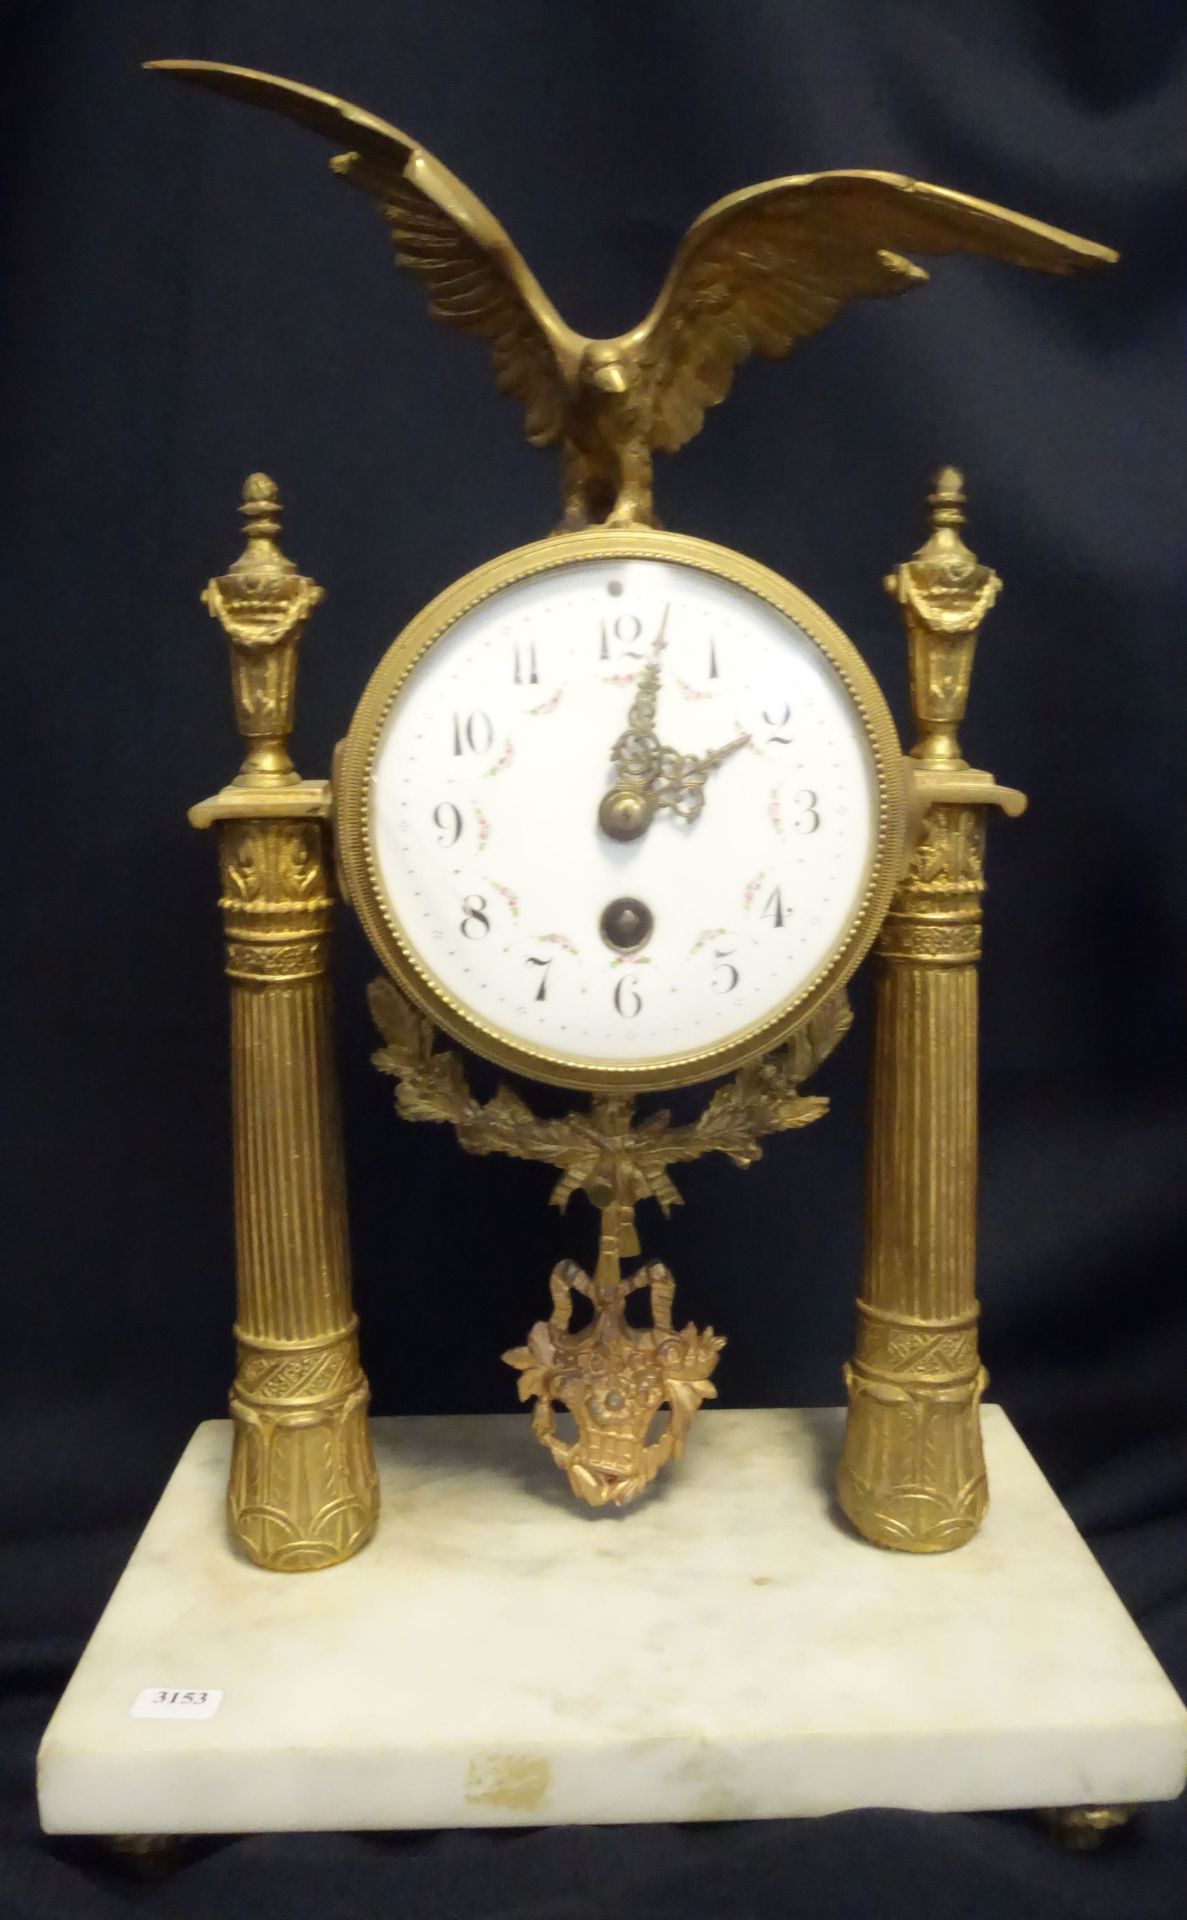 FIREPLACE CLOCK in Empire style - Image 3 of 8